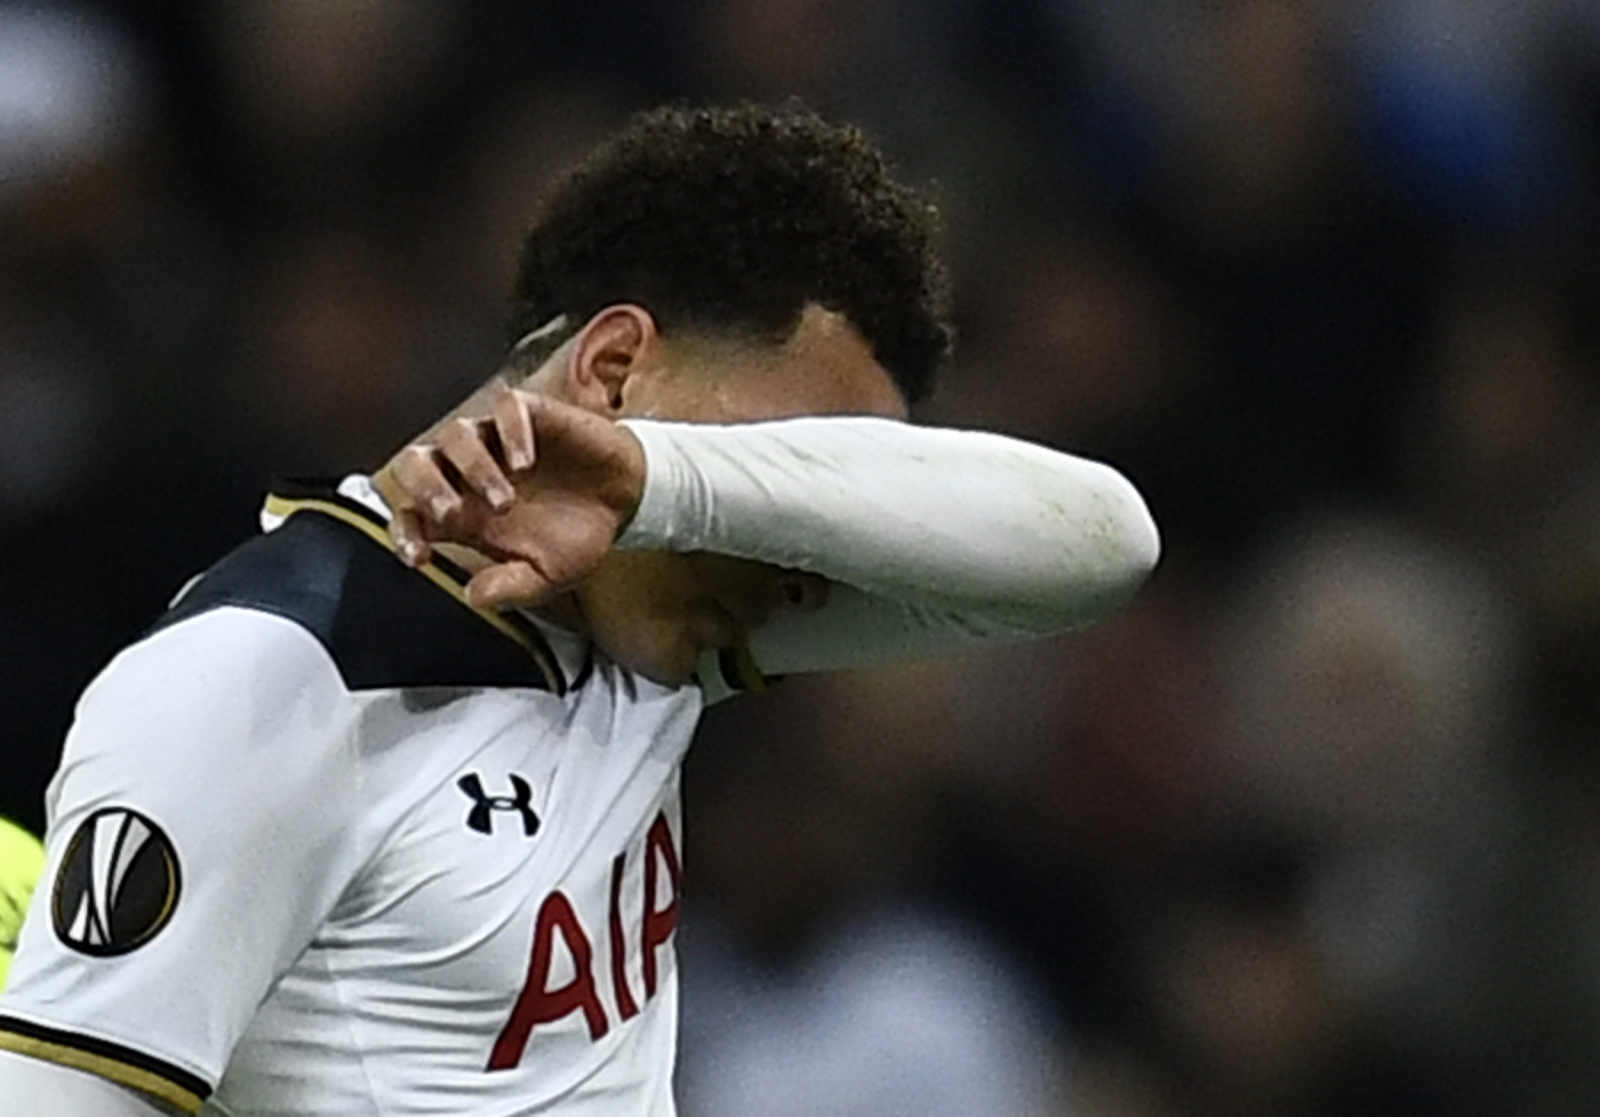 Disappointed' Tottenham midfielder after red card